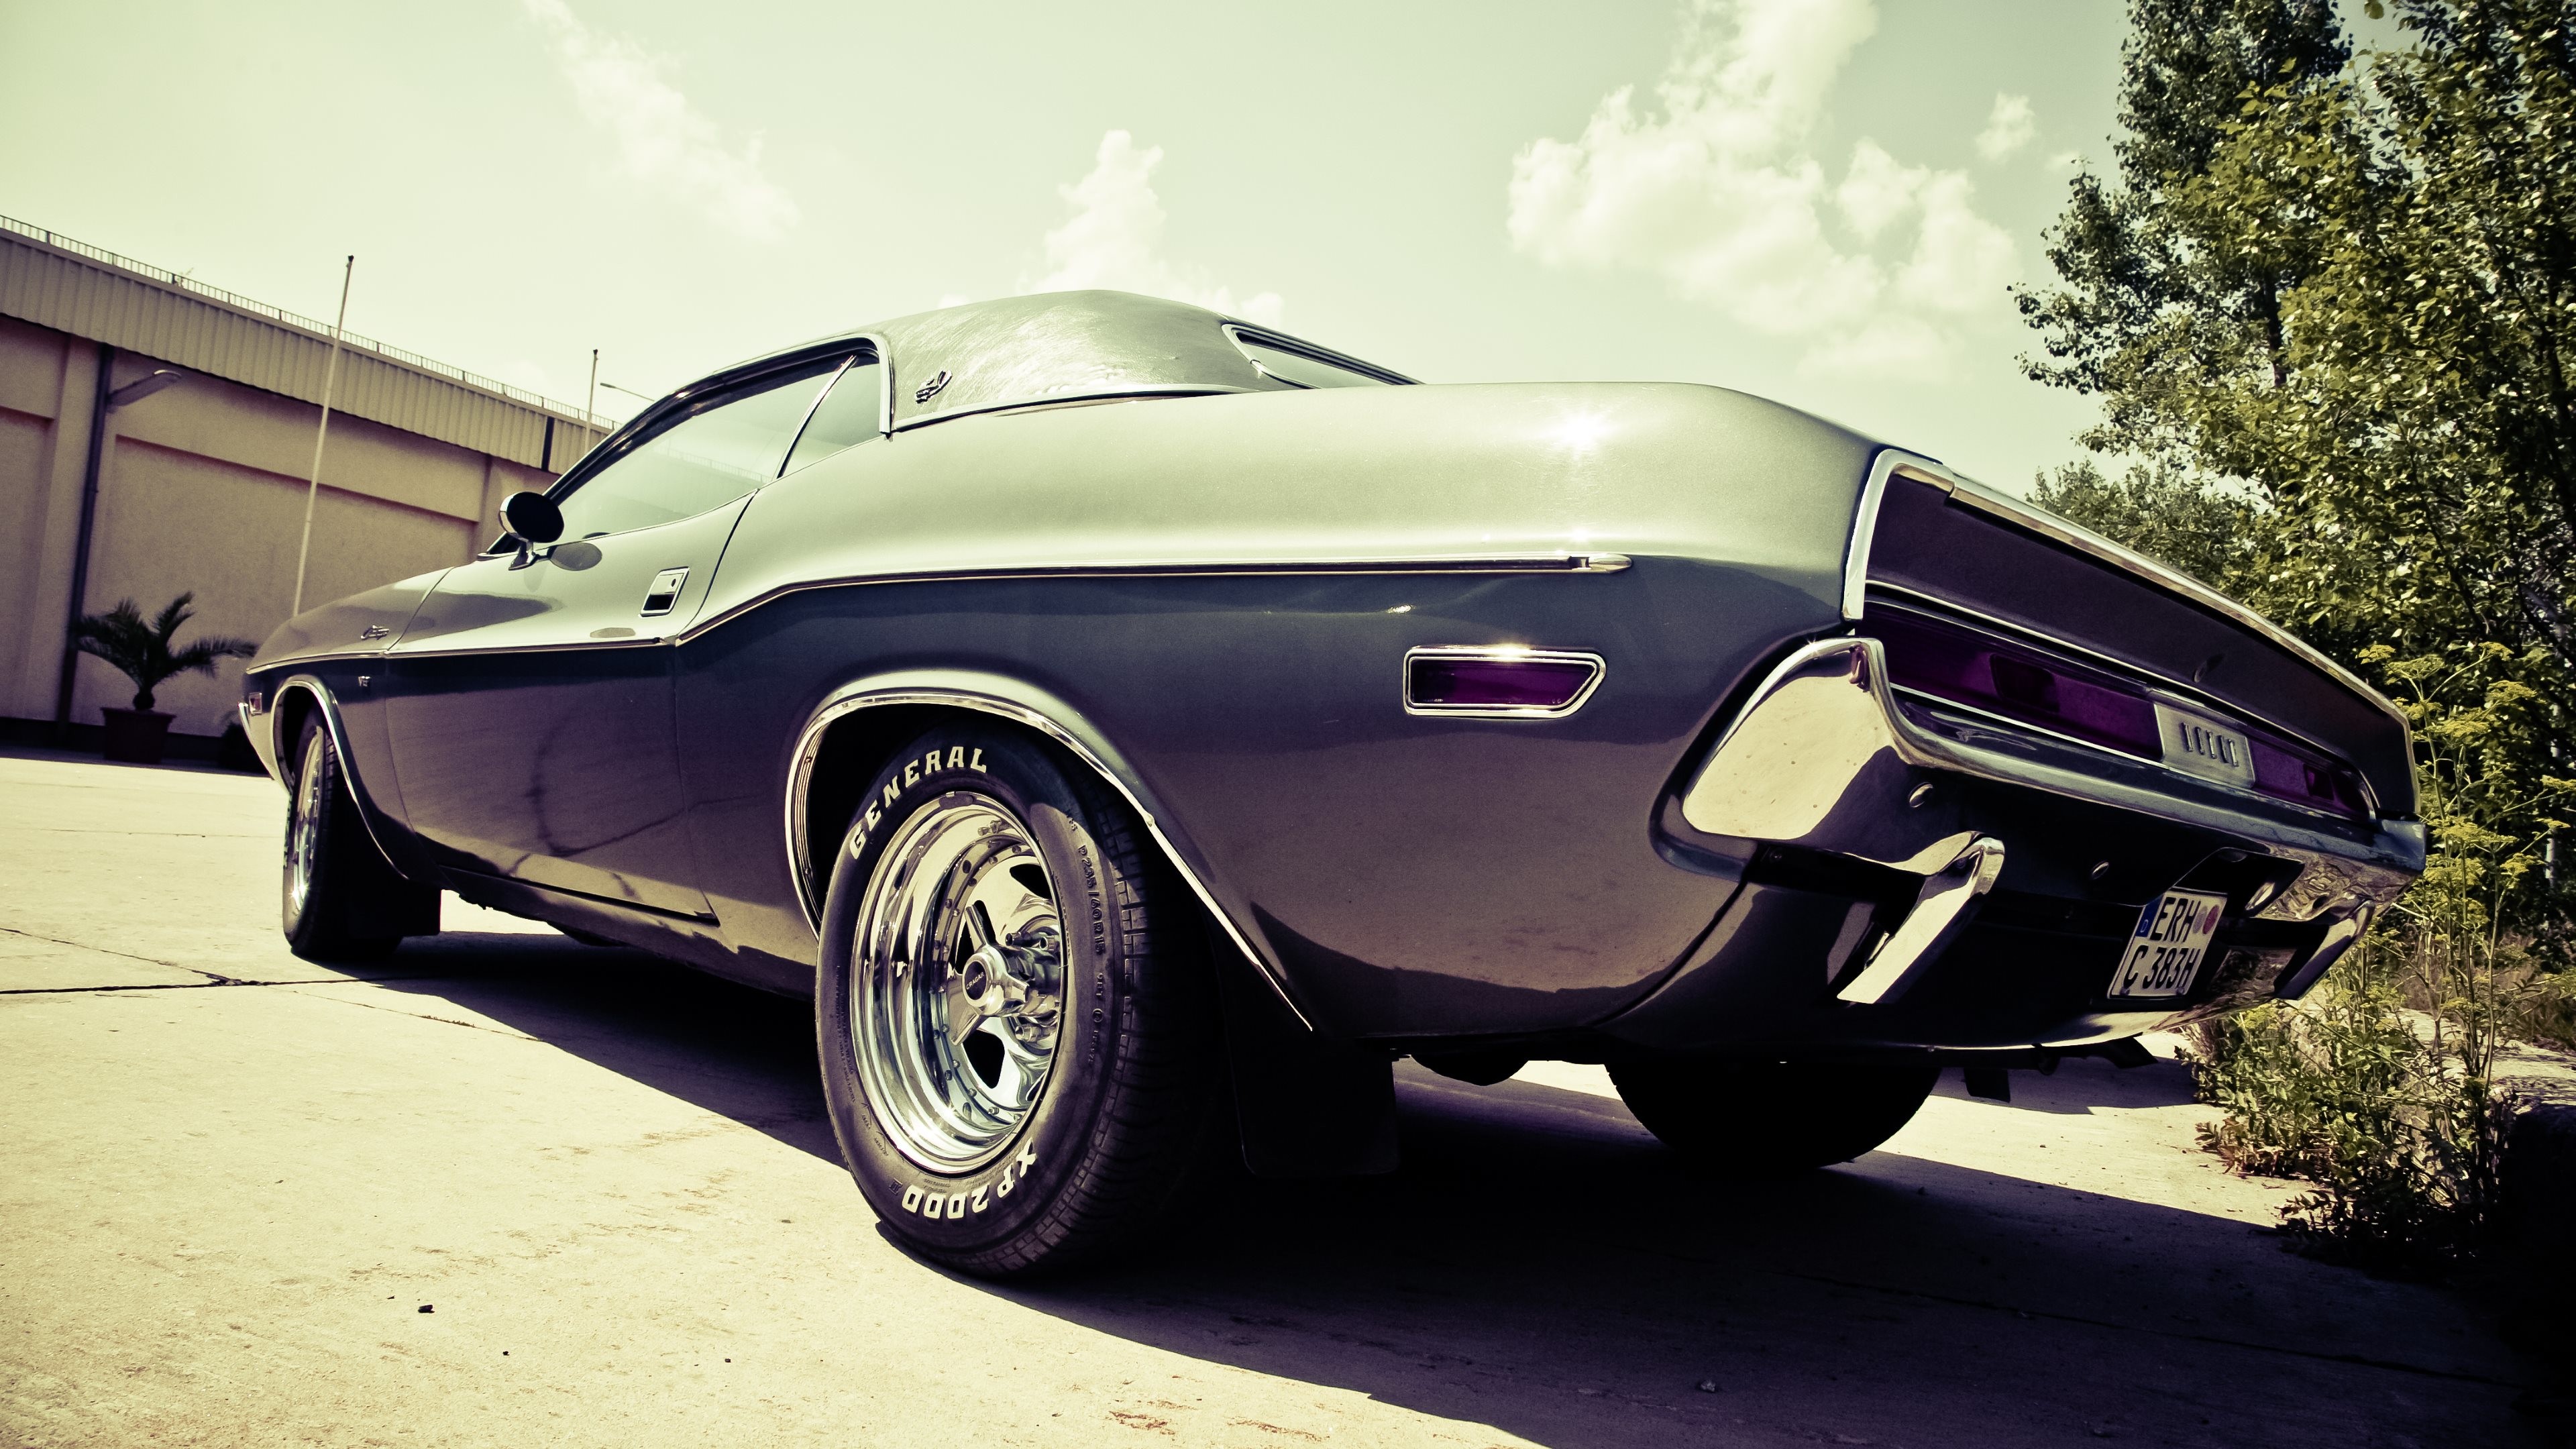 Old Muscle Cars HD Wallpapers ·① WallpaperTag